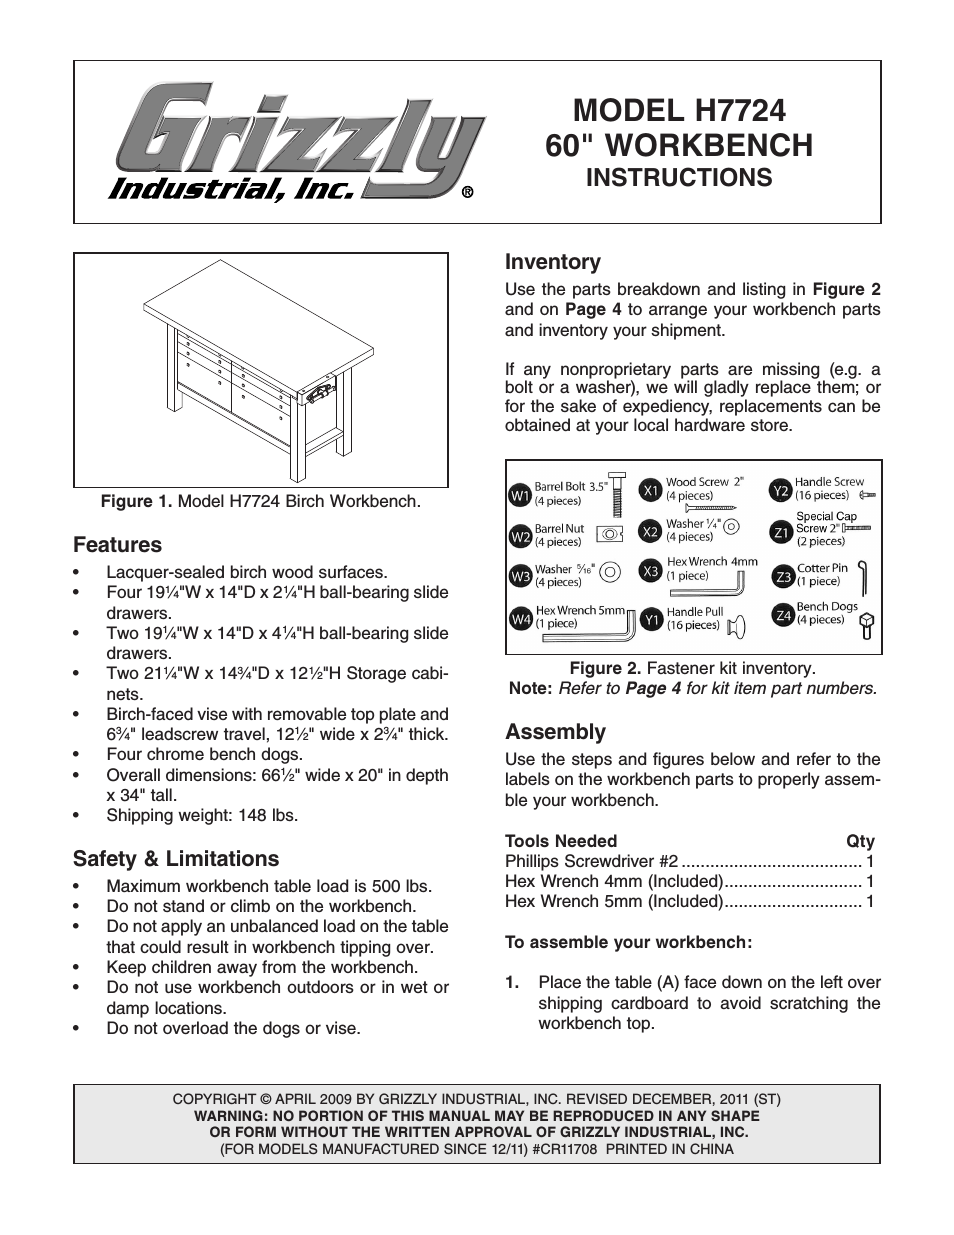 60" WORKBENCH H7724 (Page 1)